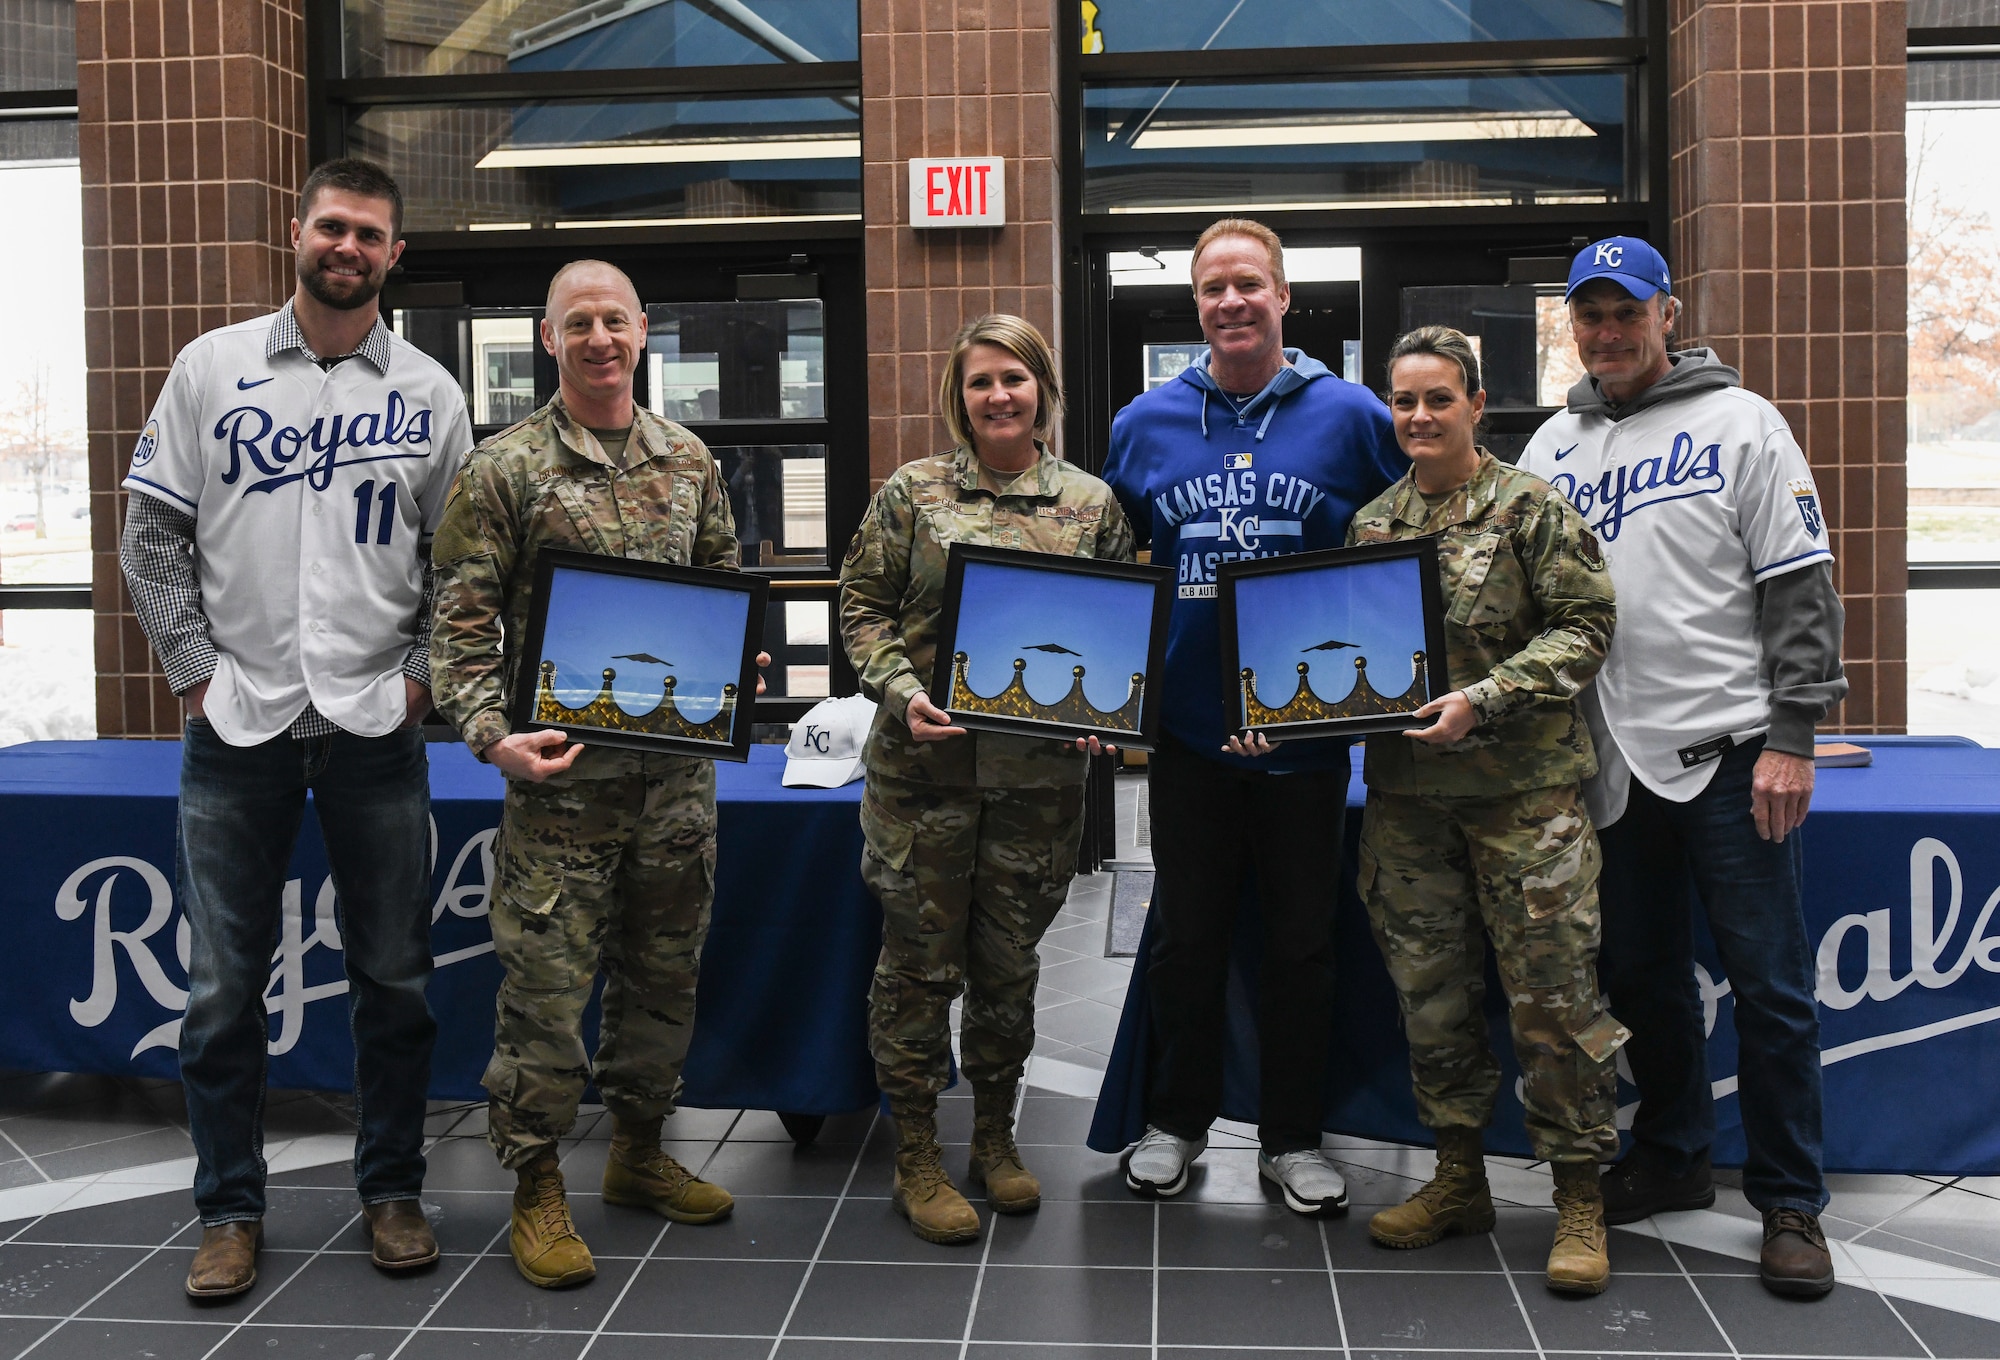 Kansas City Royals team members present a commemorative B-2 Spirit photo to 509th Bomb Wing and 131st Bomb Wing leadership during a visit at Whiteman Air Force Base, Mo., Jan. 30, 2020. During the visit, KC Royals team members ate lunch with Airmen, toured a B-2 Spirit Stealth Bomber and participated in a meet and greet while learning about the Airmen and the jobs they perform. (U.S. Air Force photo by Staff Sgt. Sadie Colbert)